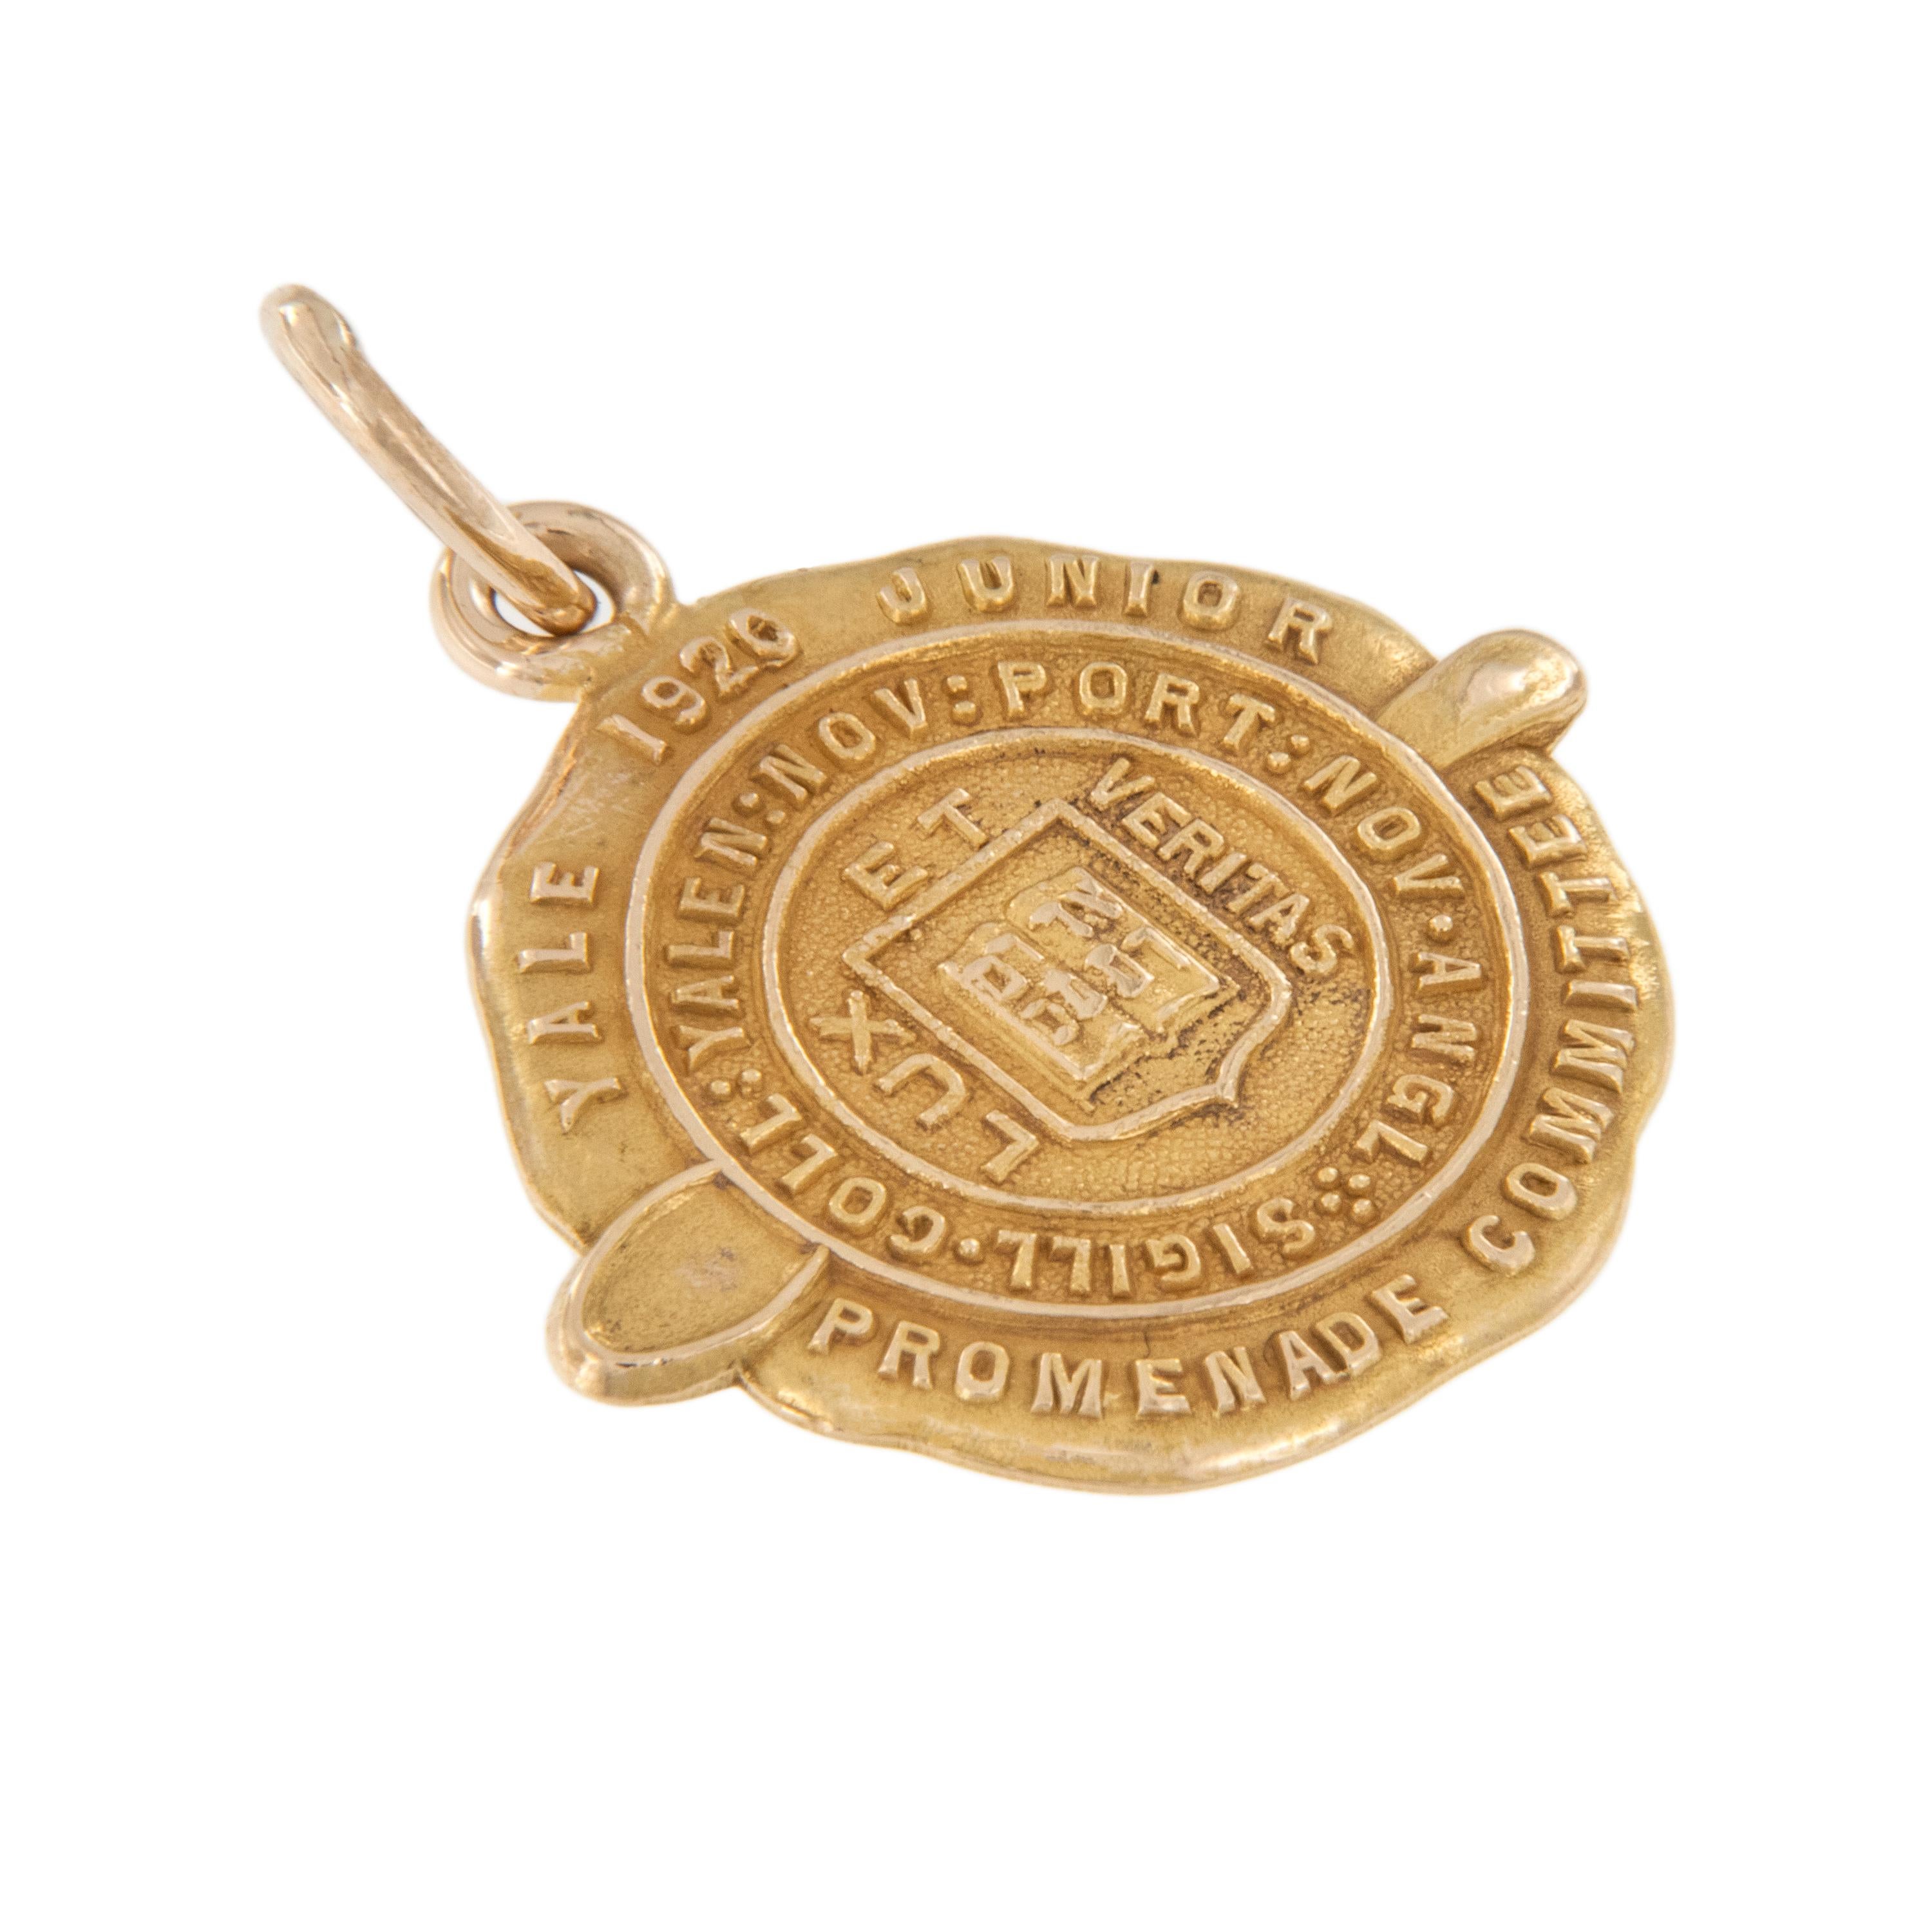 Yale University was so well known for their elaborate proms and being selected to serve on the committee to plan & execute one came with very prestigious status. We have a 1920 vintage pendant charm in excellent condition from a former committee